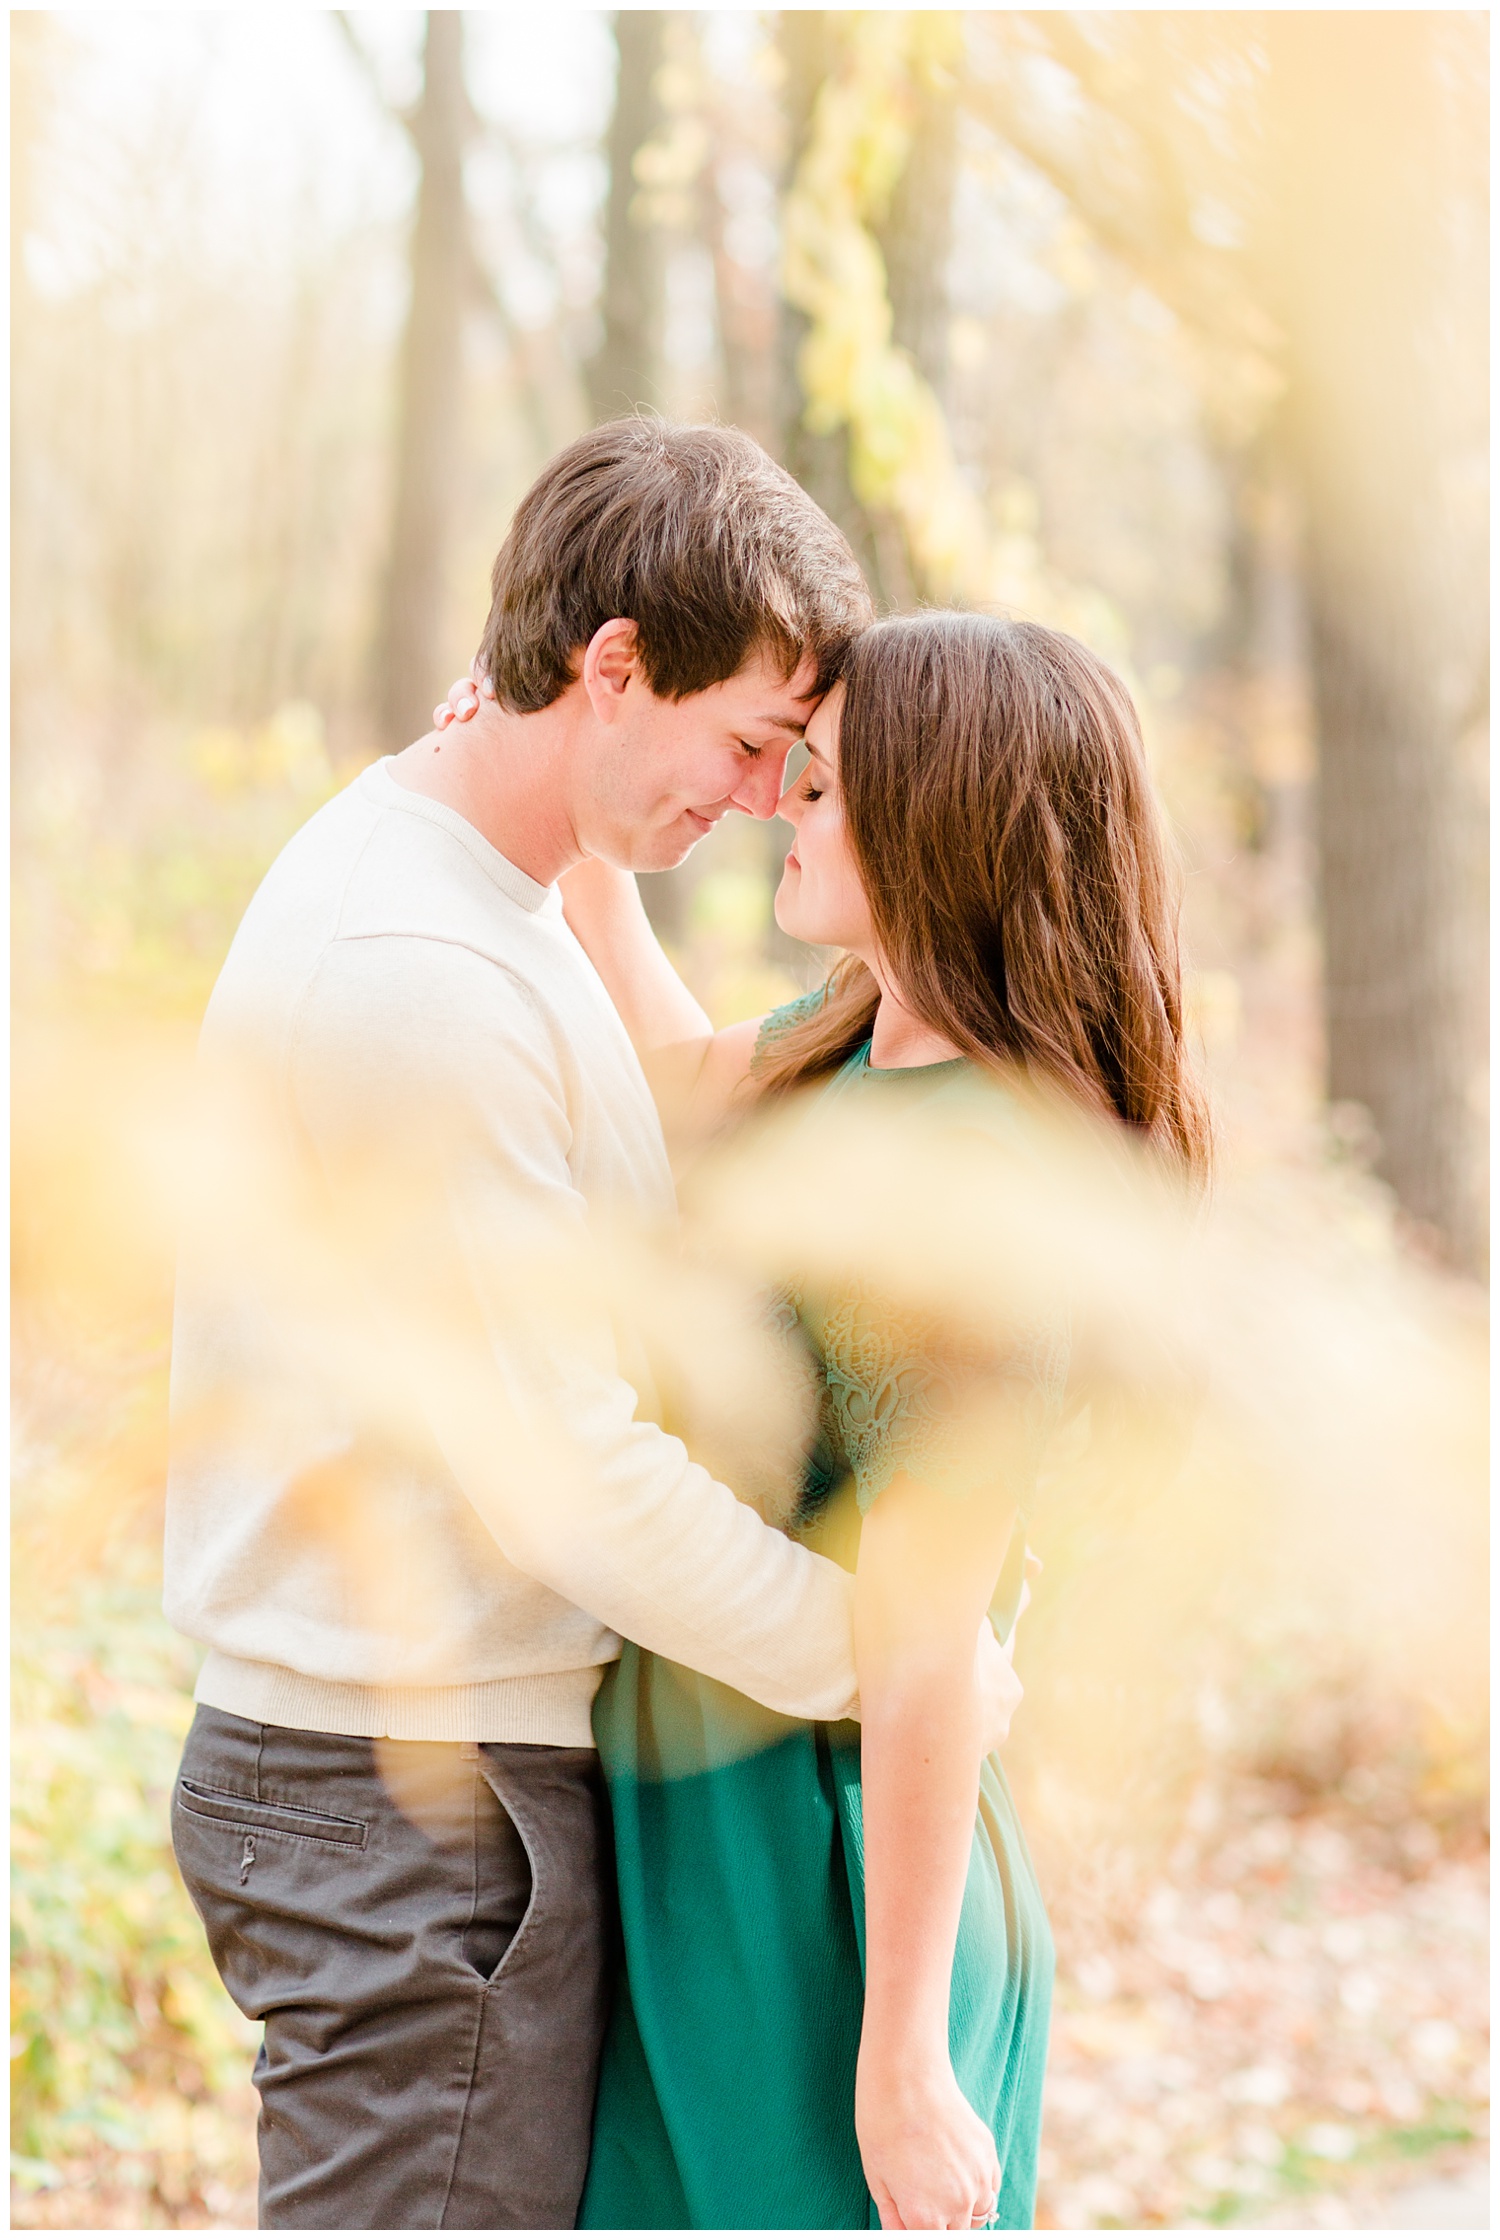 Fall in Iowa, Jenna wearing an emerald green dress embraces Brady in the middle of an autumn path at Lost Island Nature Center | CB Studio